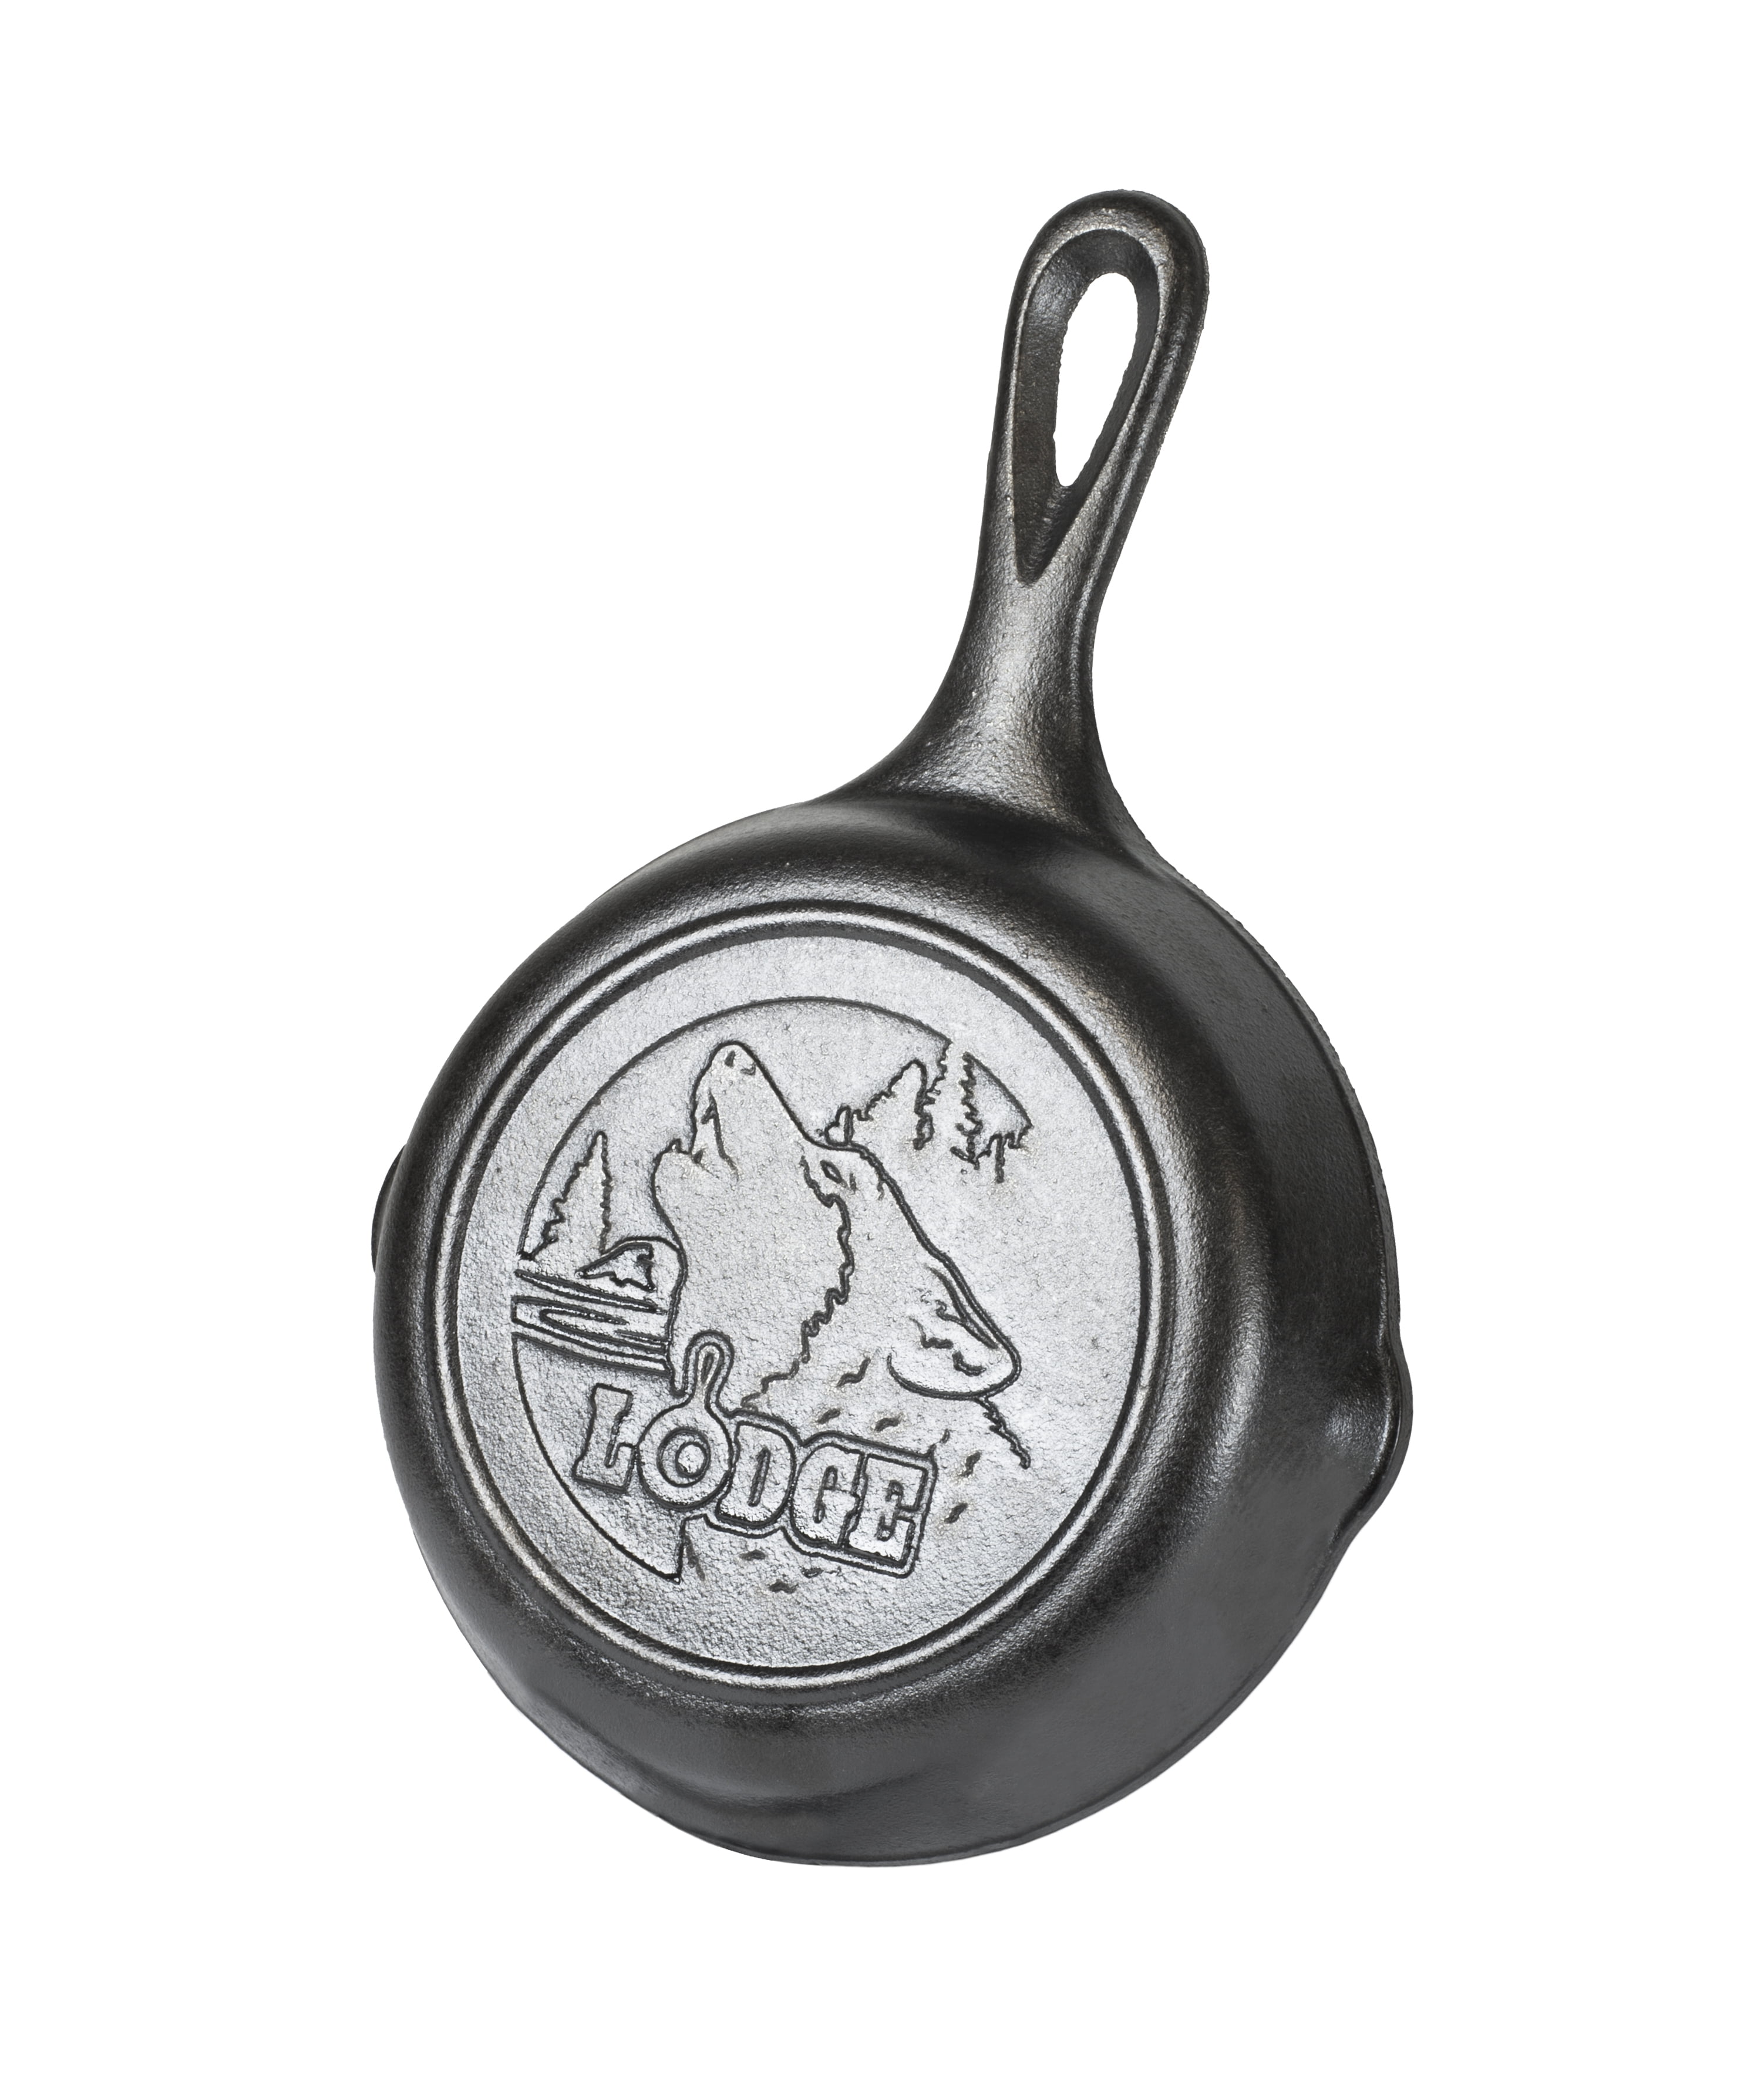 Lodge Wildlife Series - Seasoned Cast Iron Cookware with Wildlife Scenes. 5  Piece Iconic Collector Set Includes 8” Skillet, 10.25” Skillet, 12”  Skillet, 10.5” Grill Pan, and 10.5” Griddle - Cast Iron Pan Store